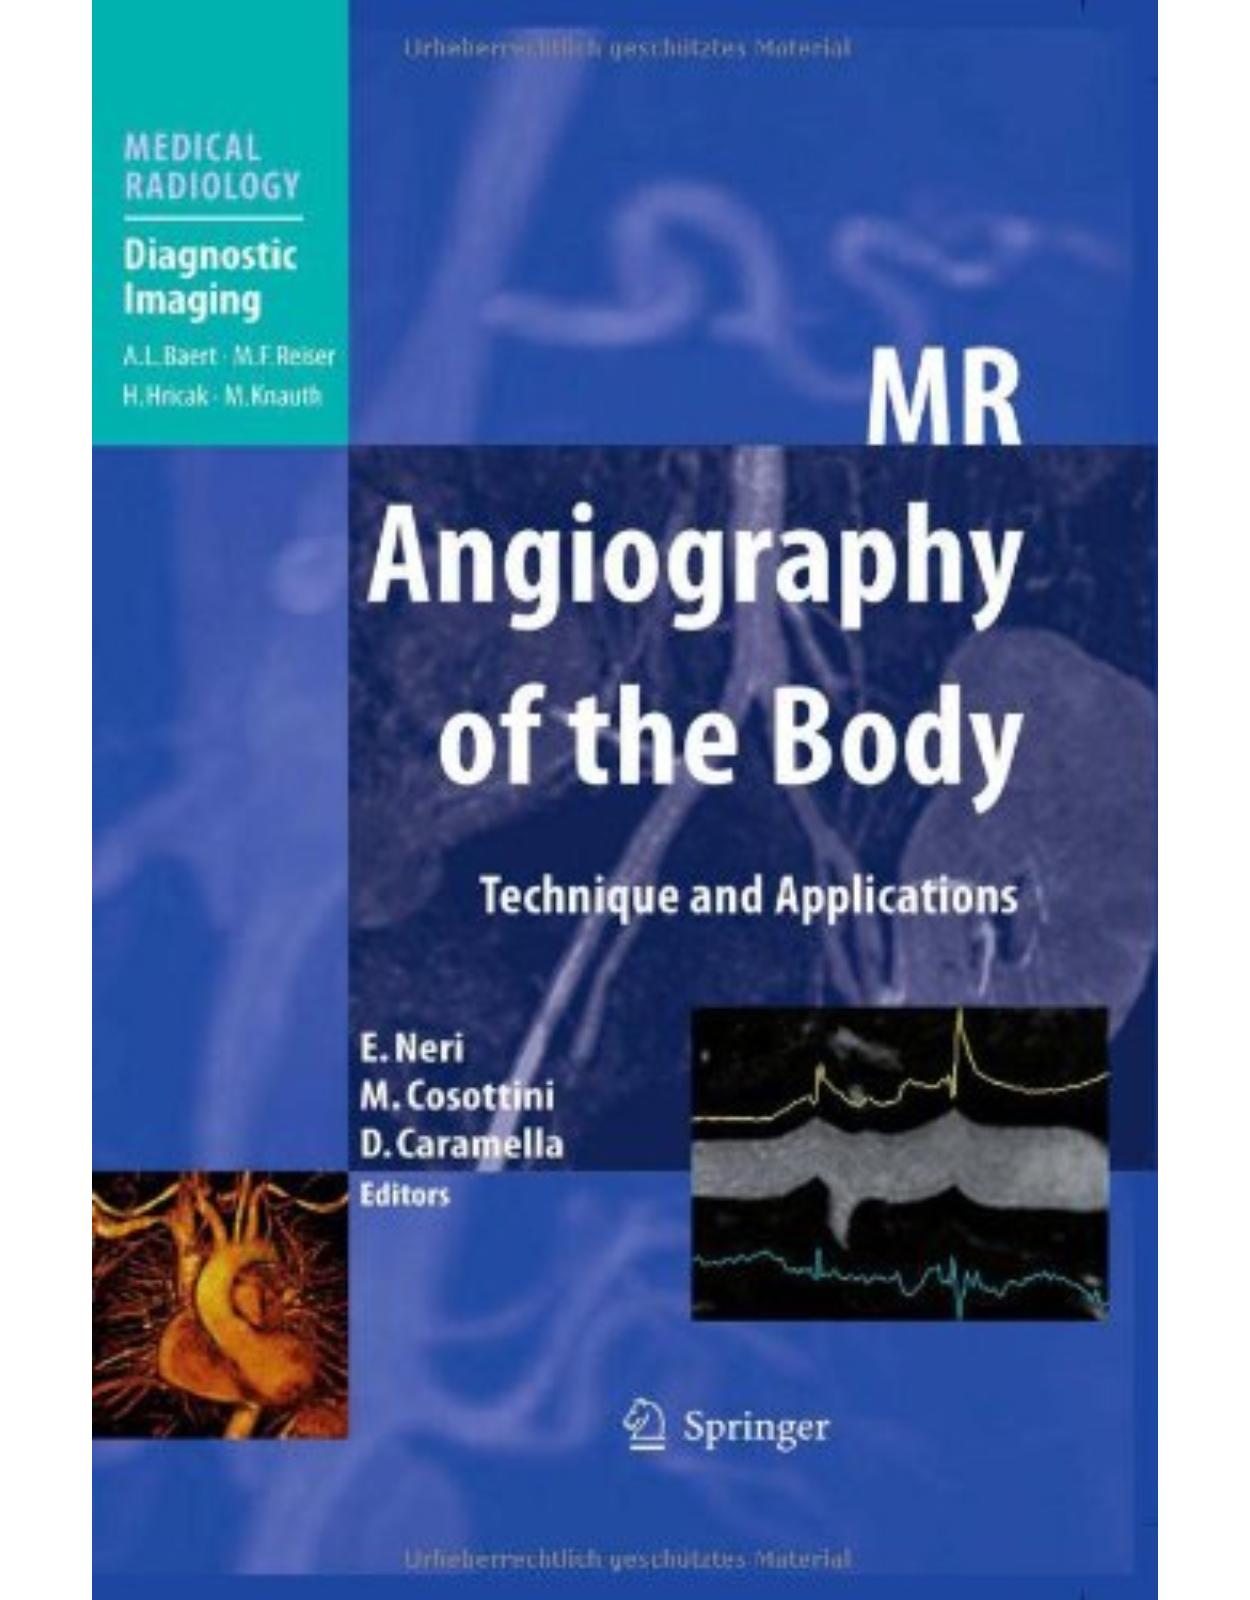 MR Angiography of the Body: Technique and Clinical Applications (Medical Radiology / Diagnostic Imaging) 